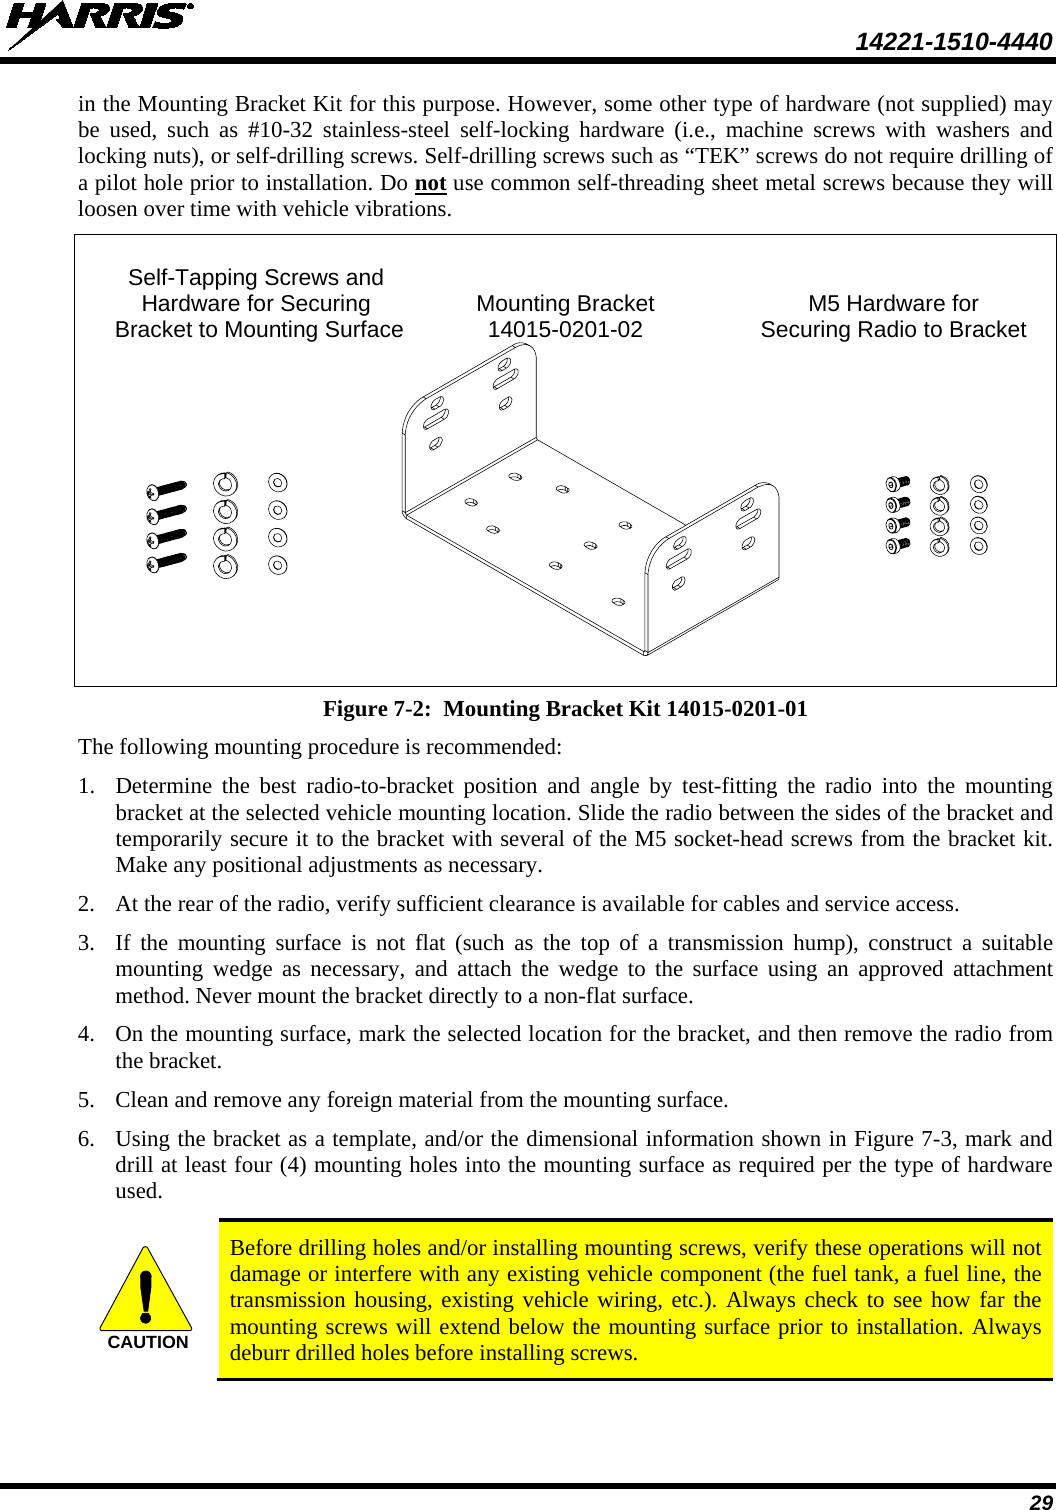  14221-1510-4440 29 in the Mounting Bracket Kit for this purpose. However, some other type of hardware (not supplied) may be used, such as #10-32 stainless-steel self-locking hardware (i.e., machine screws with washers and locking nuts), or self-drilling screws. Self-drilling screws such as “TEK” screws do not require drilling of a pilot hole prior to installation. Do not use common self-threading sheet metal screws because they will loosen over time with vehicle vibrations.    Self-Tapping Screws and  Hardware for Securing Mounting Bracket M5 Hardware for    Bracket to Mounting Surface 14015-0201-02   Securing Radio to Bracket   Figure 7-2:  Mounting Bracket Kit 14015-0201-01 The following mounting procedure is recommended: 1. Determine the best radio-to-bracket position and angle by test-fitting the radio into the mounting bracket at the selected vehicle mounting location. Slide the radio between the sides of the bracket and temporarily secure it to the bracket with several of the M5 socket-head screws from the bracket kit.  Make any positional adjustments as necessary. 2. At the rear of the radio, verify sufficient clearance is available for cables and service access. 3. If the mounting surface is not flat (such as the top of a transmission hump), construct a suitable mounting wedge as necessary, and attach the wedge to the surface using an approved attachment method. Never mount the bracket directly to a non-flat surface. 4. On the mounting surface, mark the selected location for the bracket, and then remove the radio from the bracket. 5. Clean and remove any foreign material from the mounting surface. 6. Using the bracket as a template, and/or the dimensional information shown in Figure 7-3, mark and drill at least four (4) mounting holes into the mounting surface as required per the type of hardware used.   Before drilling holes and/or installing mounting screws, verify these operations will not damage or interfere with any existing vehicle component (the fuel tank, a fuel line, the transmission housing, existing vehicle wiring, etc.). Always check to see how far the mounting screws will extend below the mounting surface prior to installation. Always deburr drilled holes before installing screws.  CAUTION